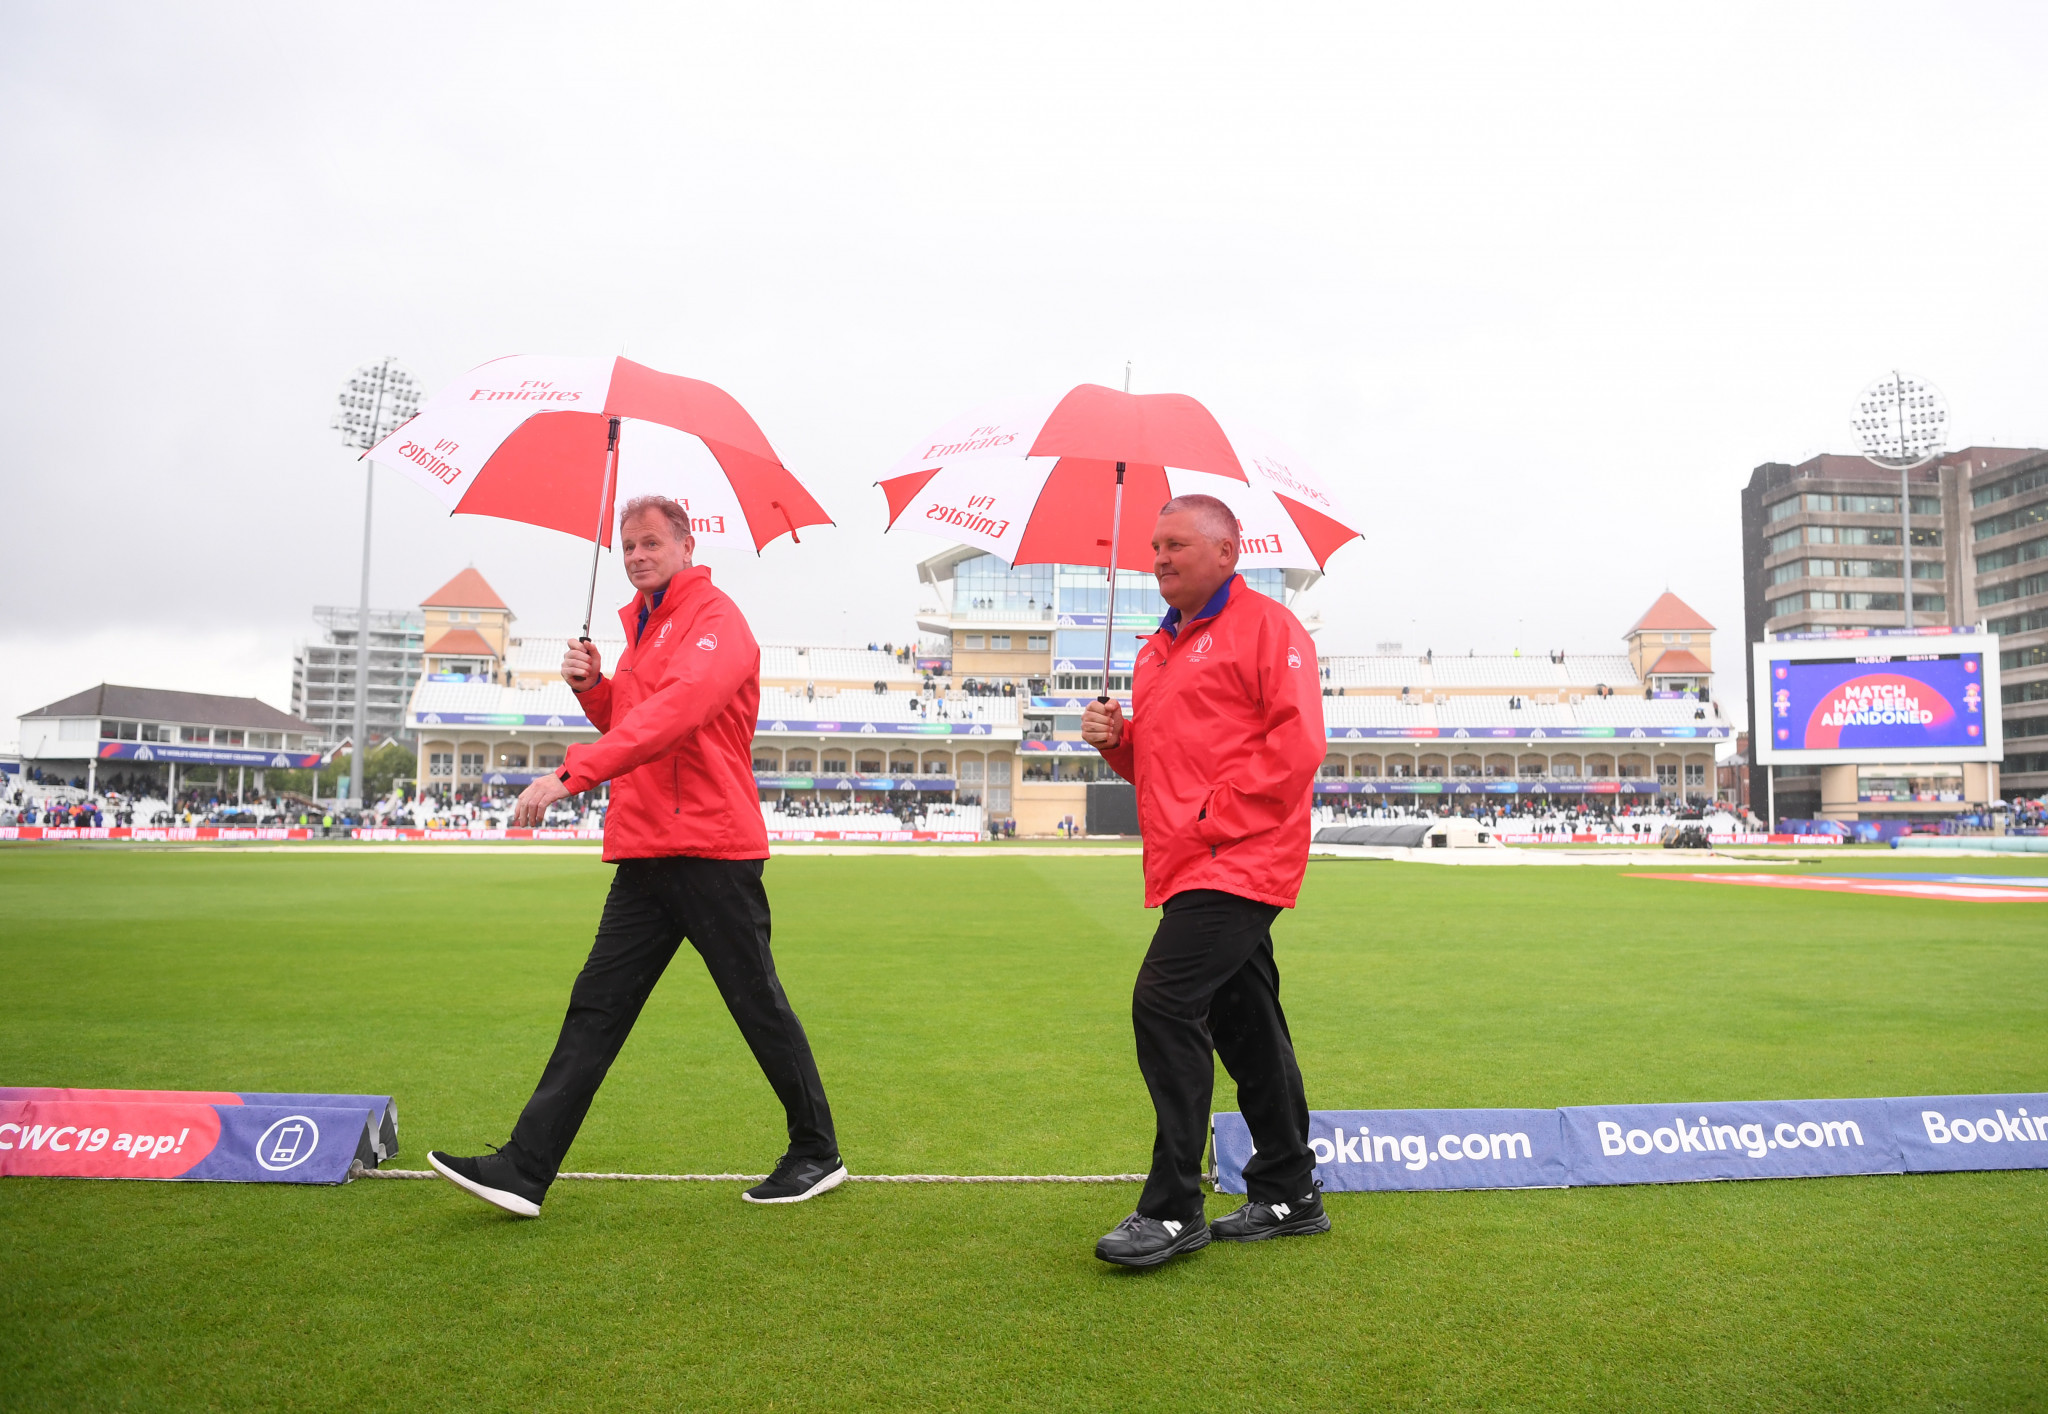 India's clash with New Zealand rained off as ICC Cricket World Cup suffers fourth call-off